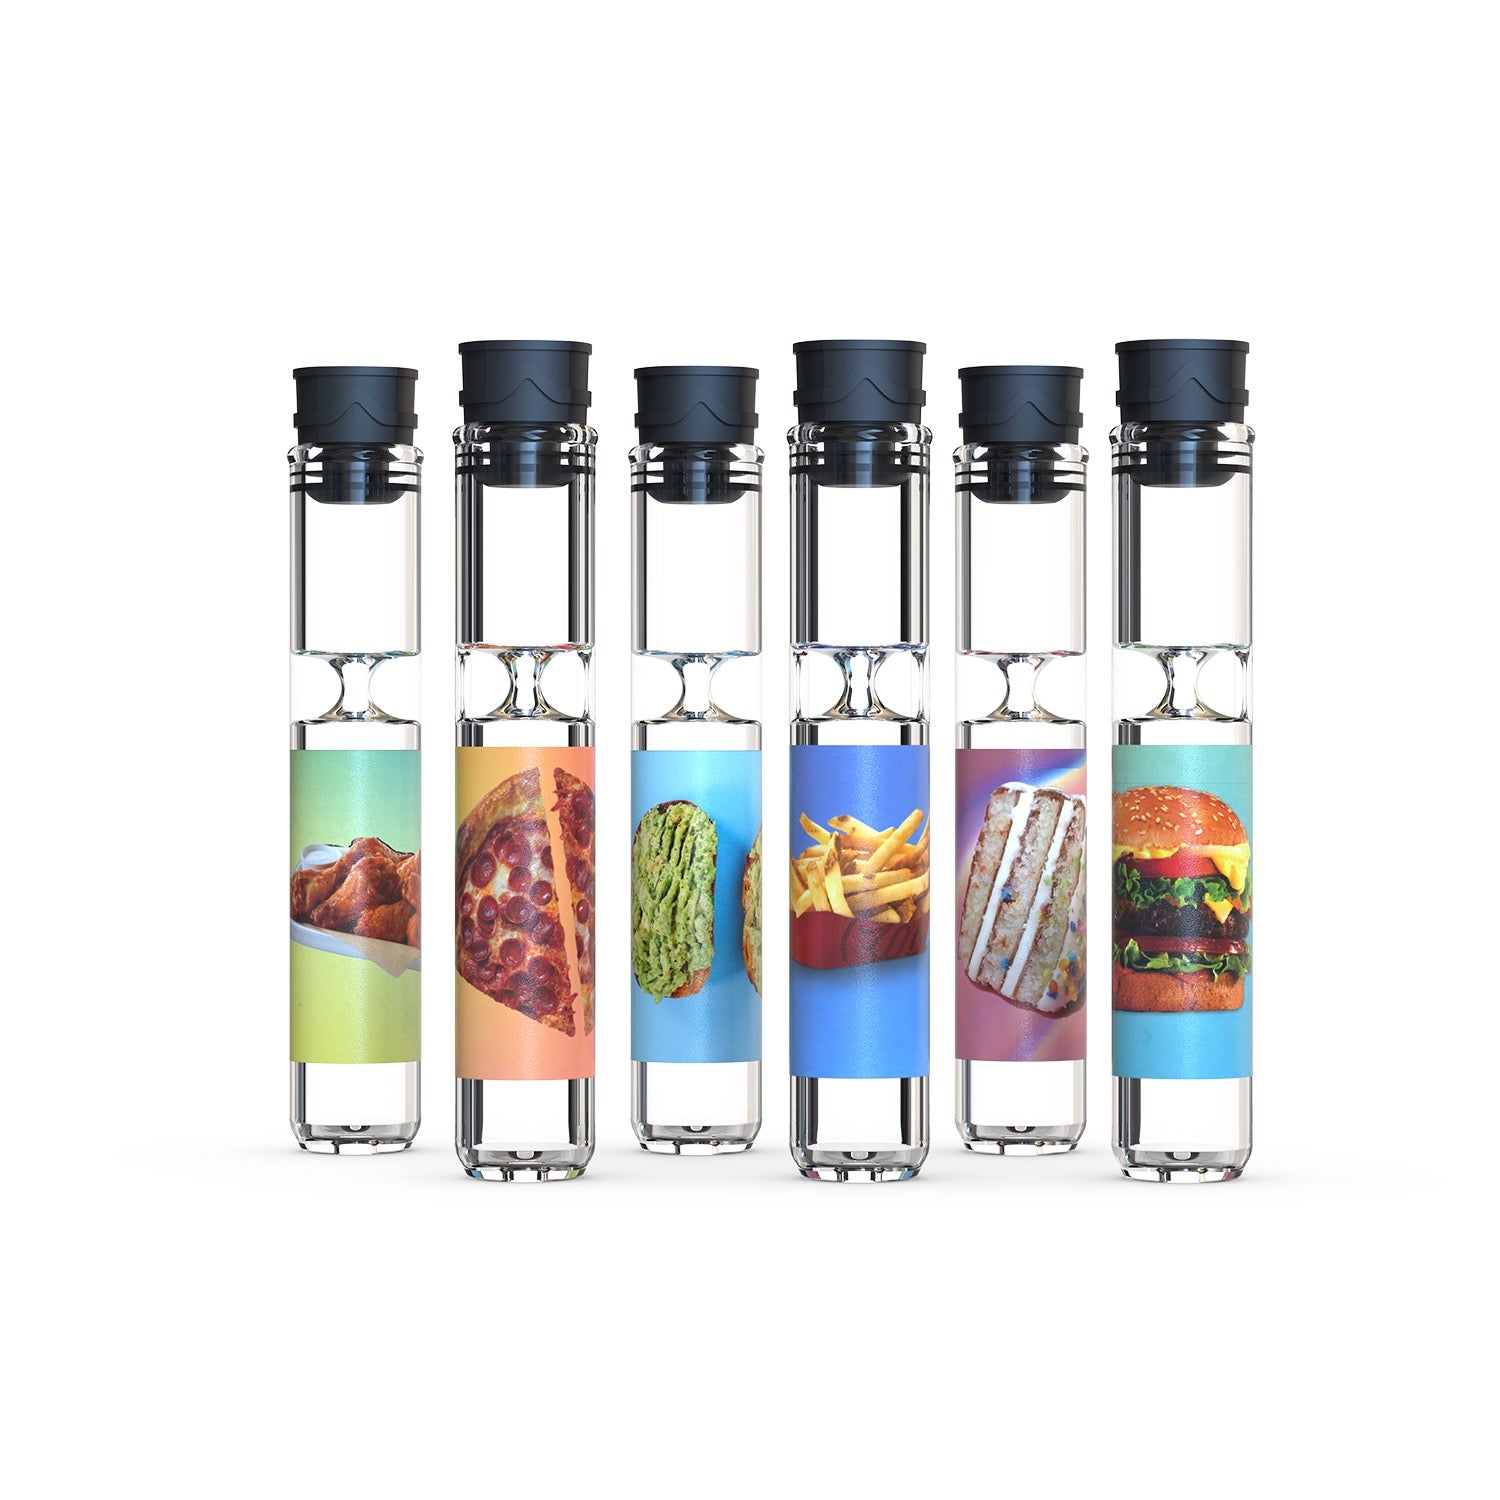 variety pack of 6 unique glass chillum pipes with caps.